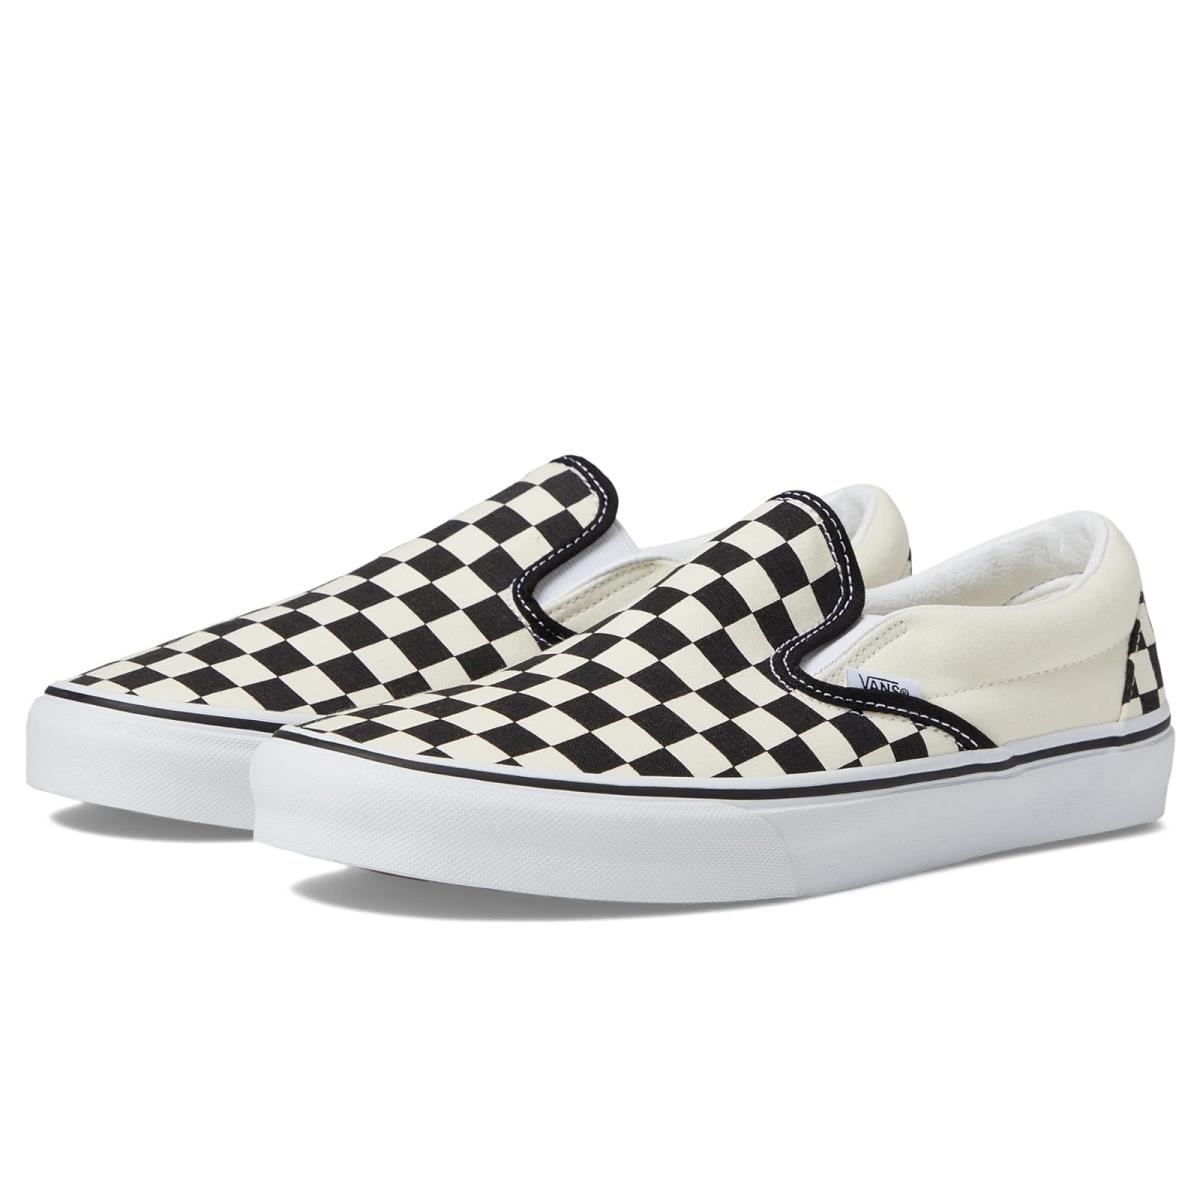 Unisex Sneakers Athletic Shoes Vans Classic Slip-on Wide Checkerboard Black/Classic White